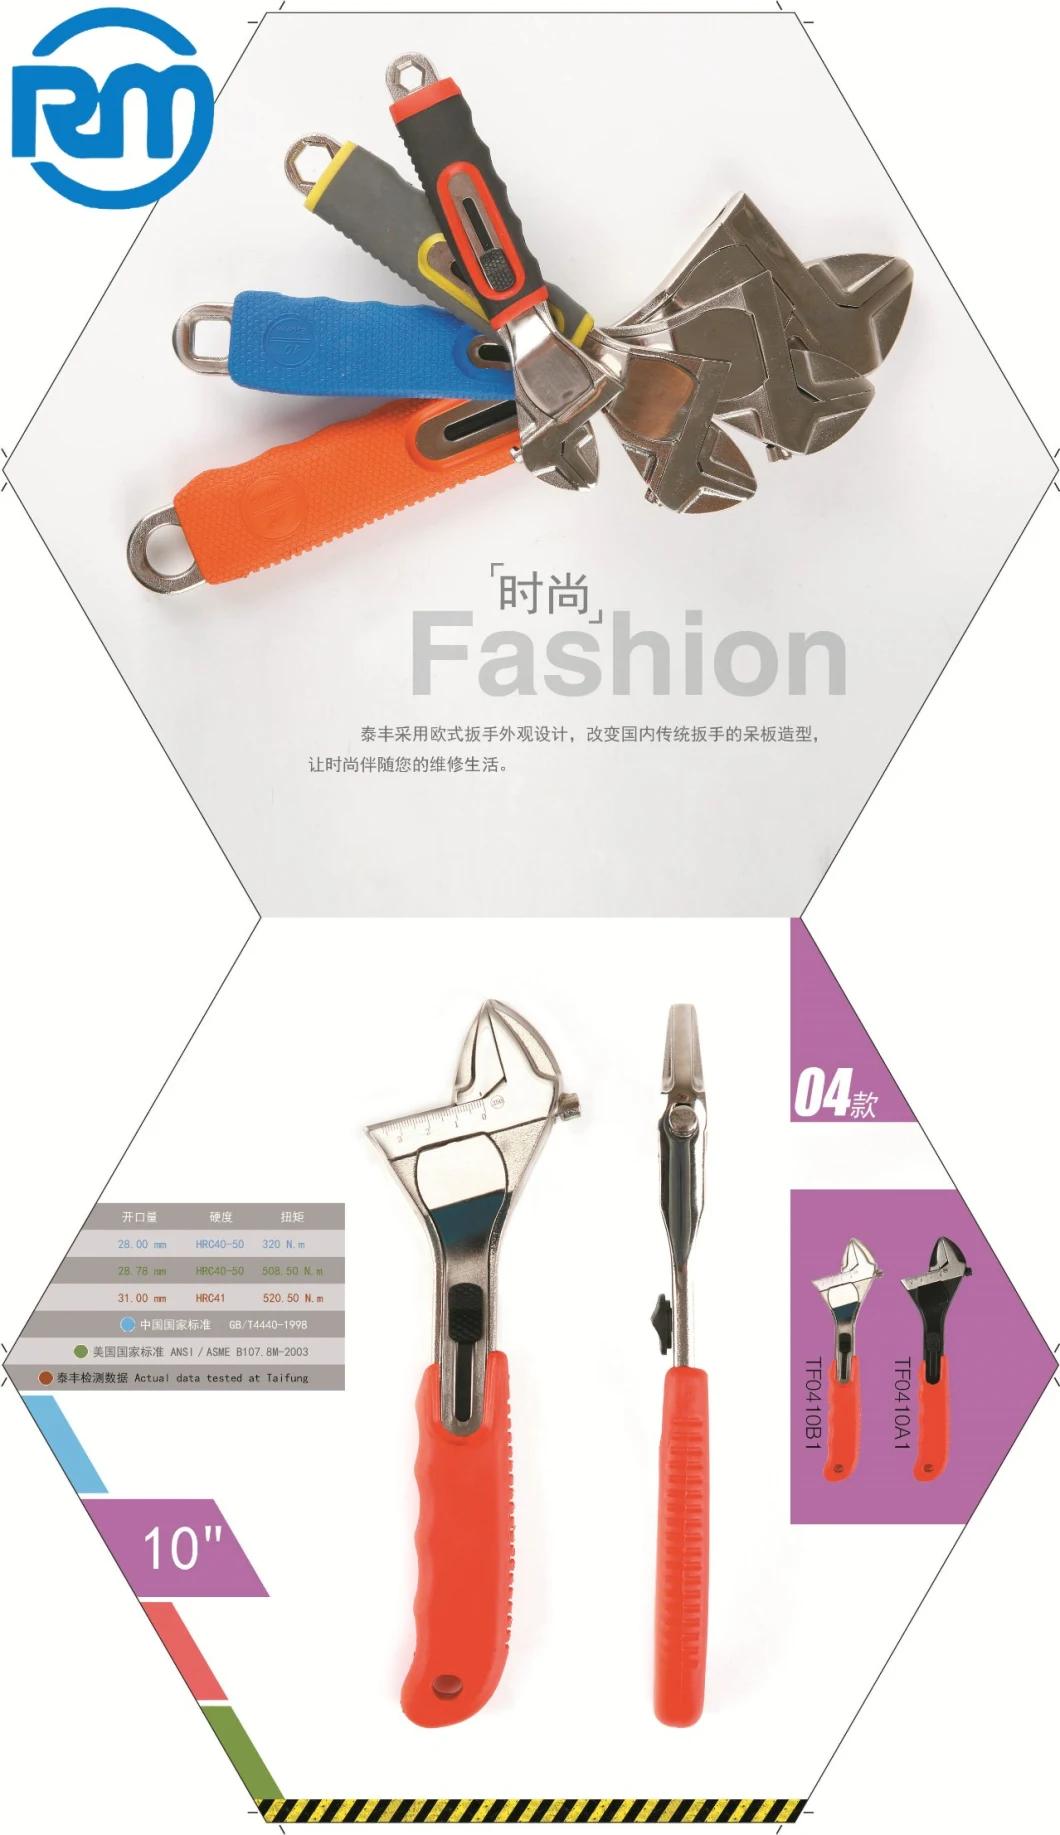 Super Multi Function Double Ended Ratchet Gear Combination 48 Adjustable Wrench Spanner Set Tools Kits